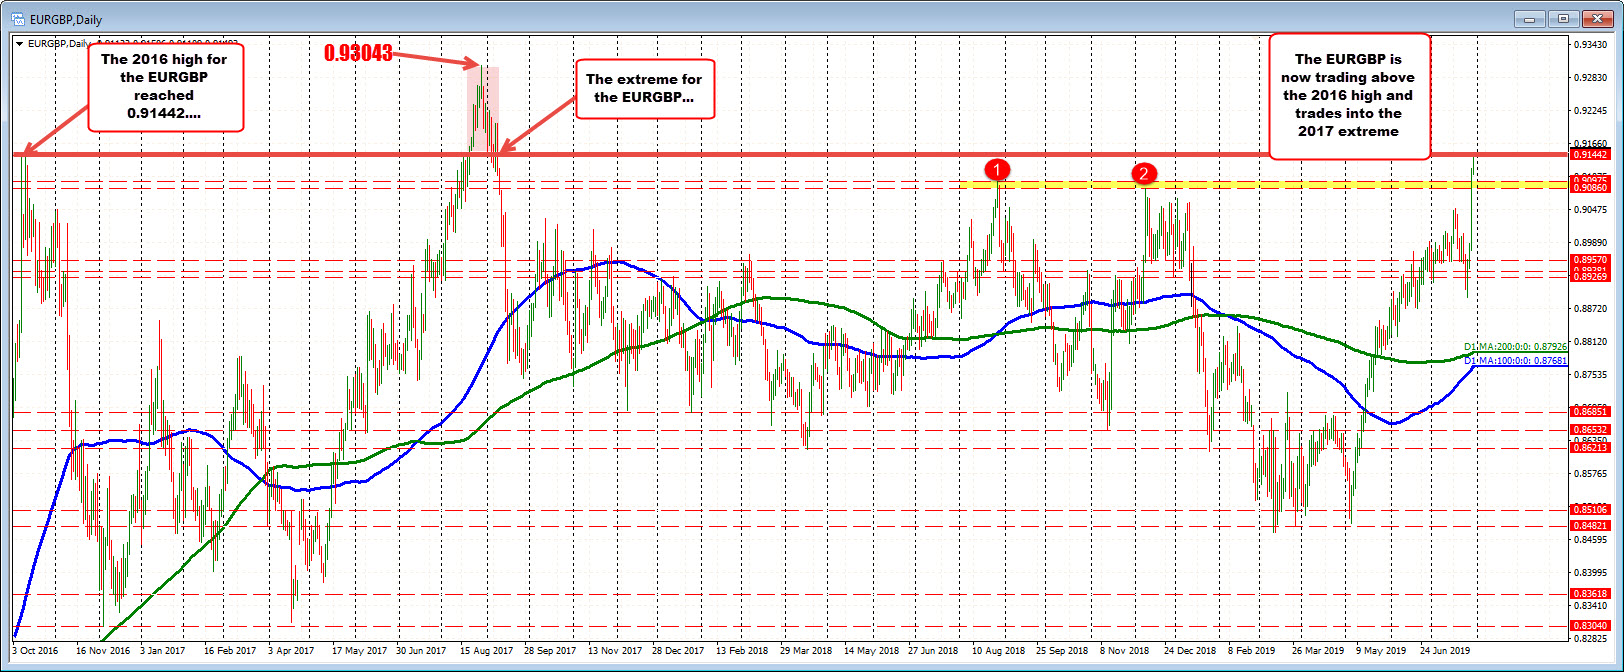 USDJPY remains in the channel